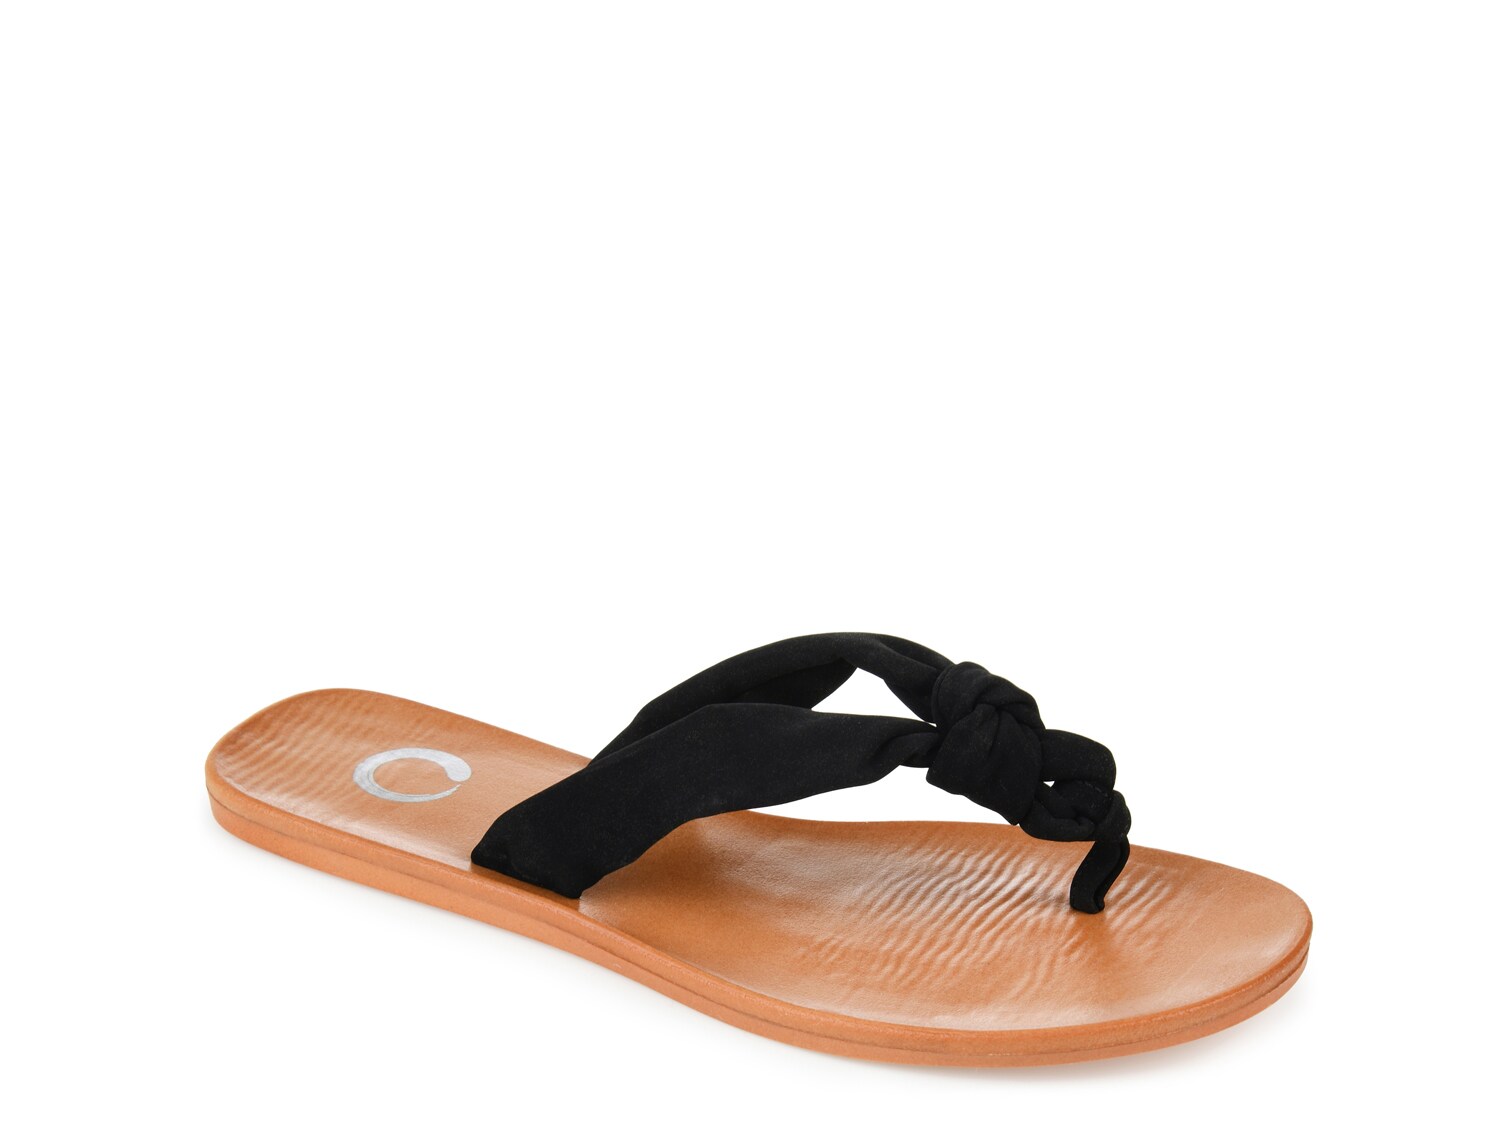 Journee Collection Brindle Flip Flop - Free Shipping | DSW